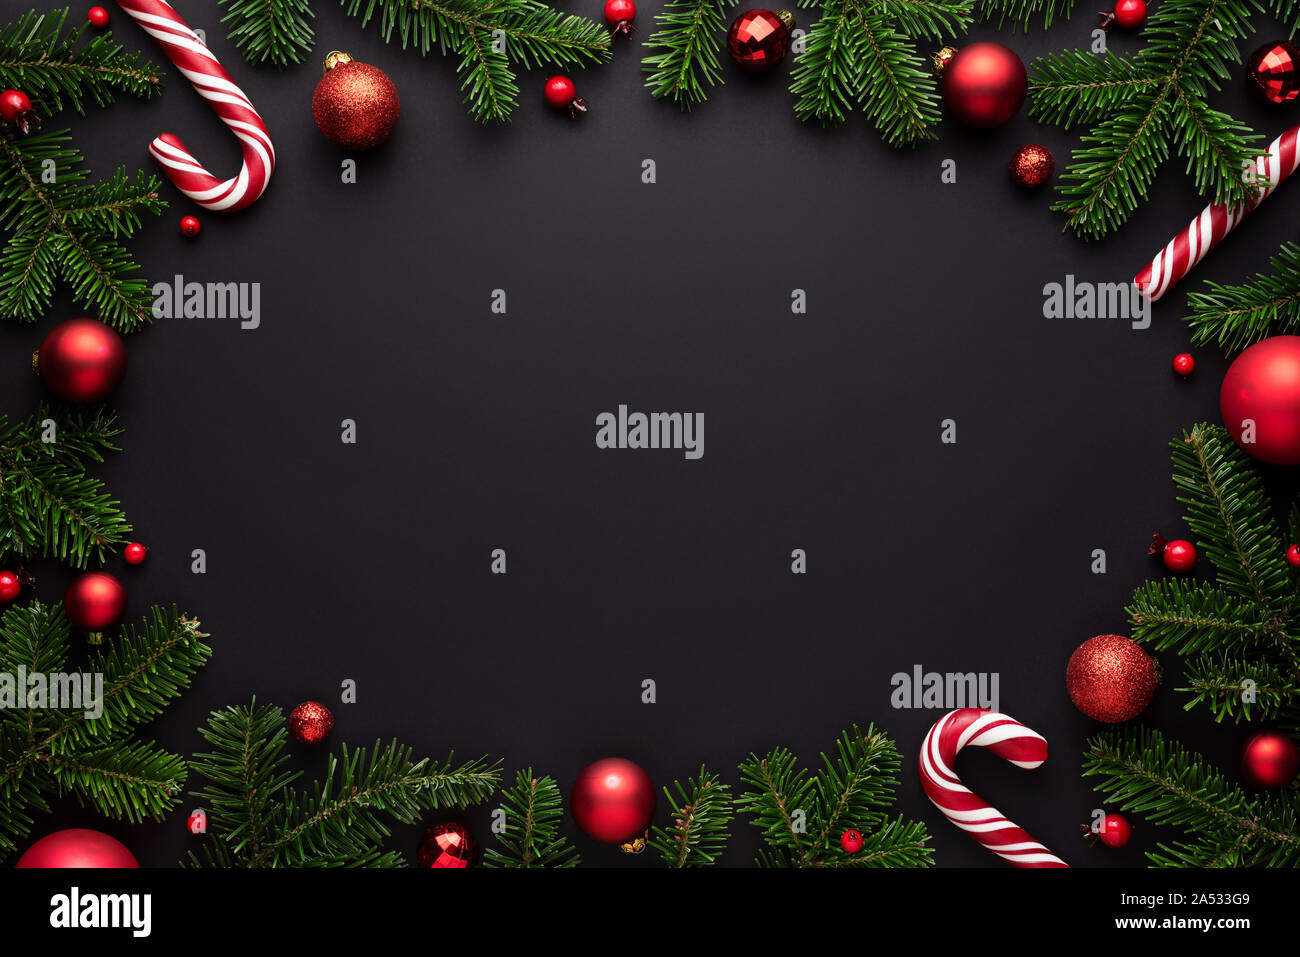 Black Christmas background. Decorative oval frame of fir branches, Christmas balls and Candy canes. Copy space for text Stock Photo